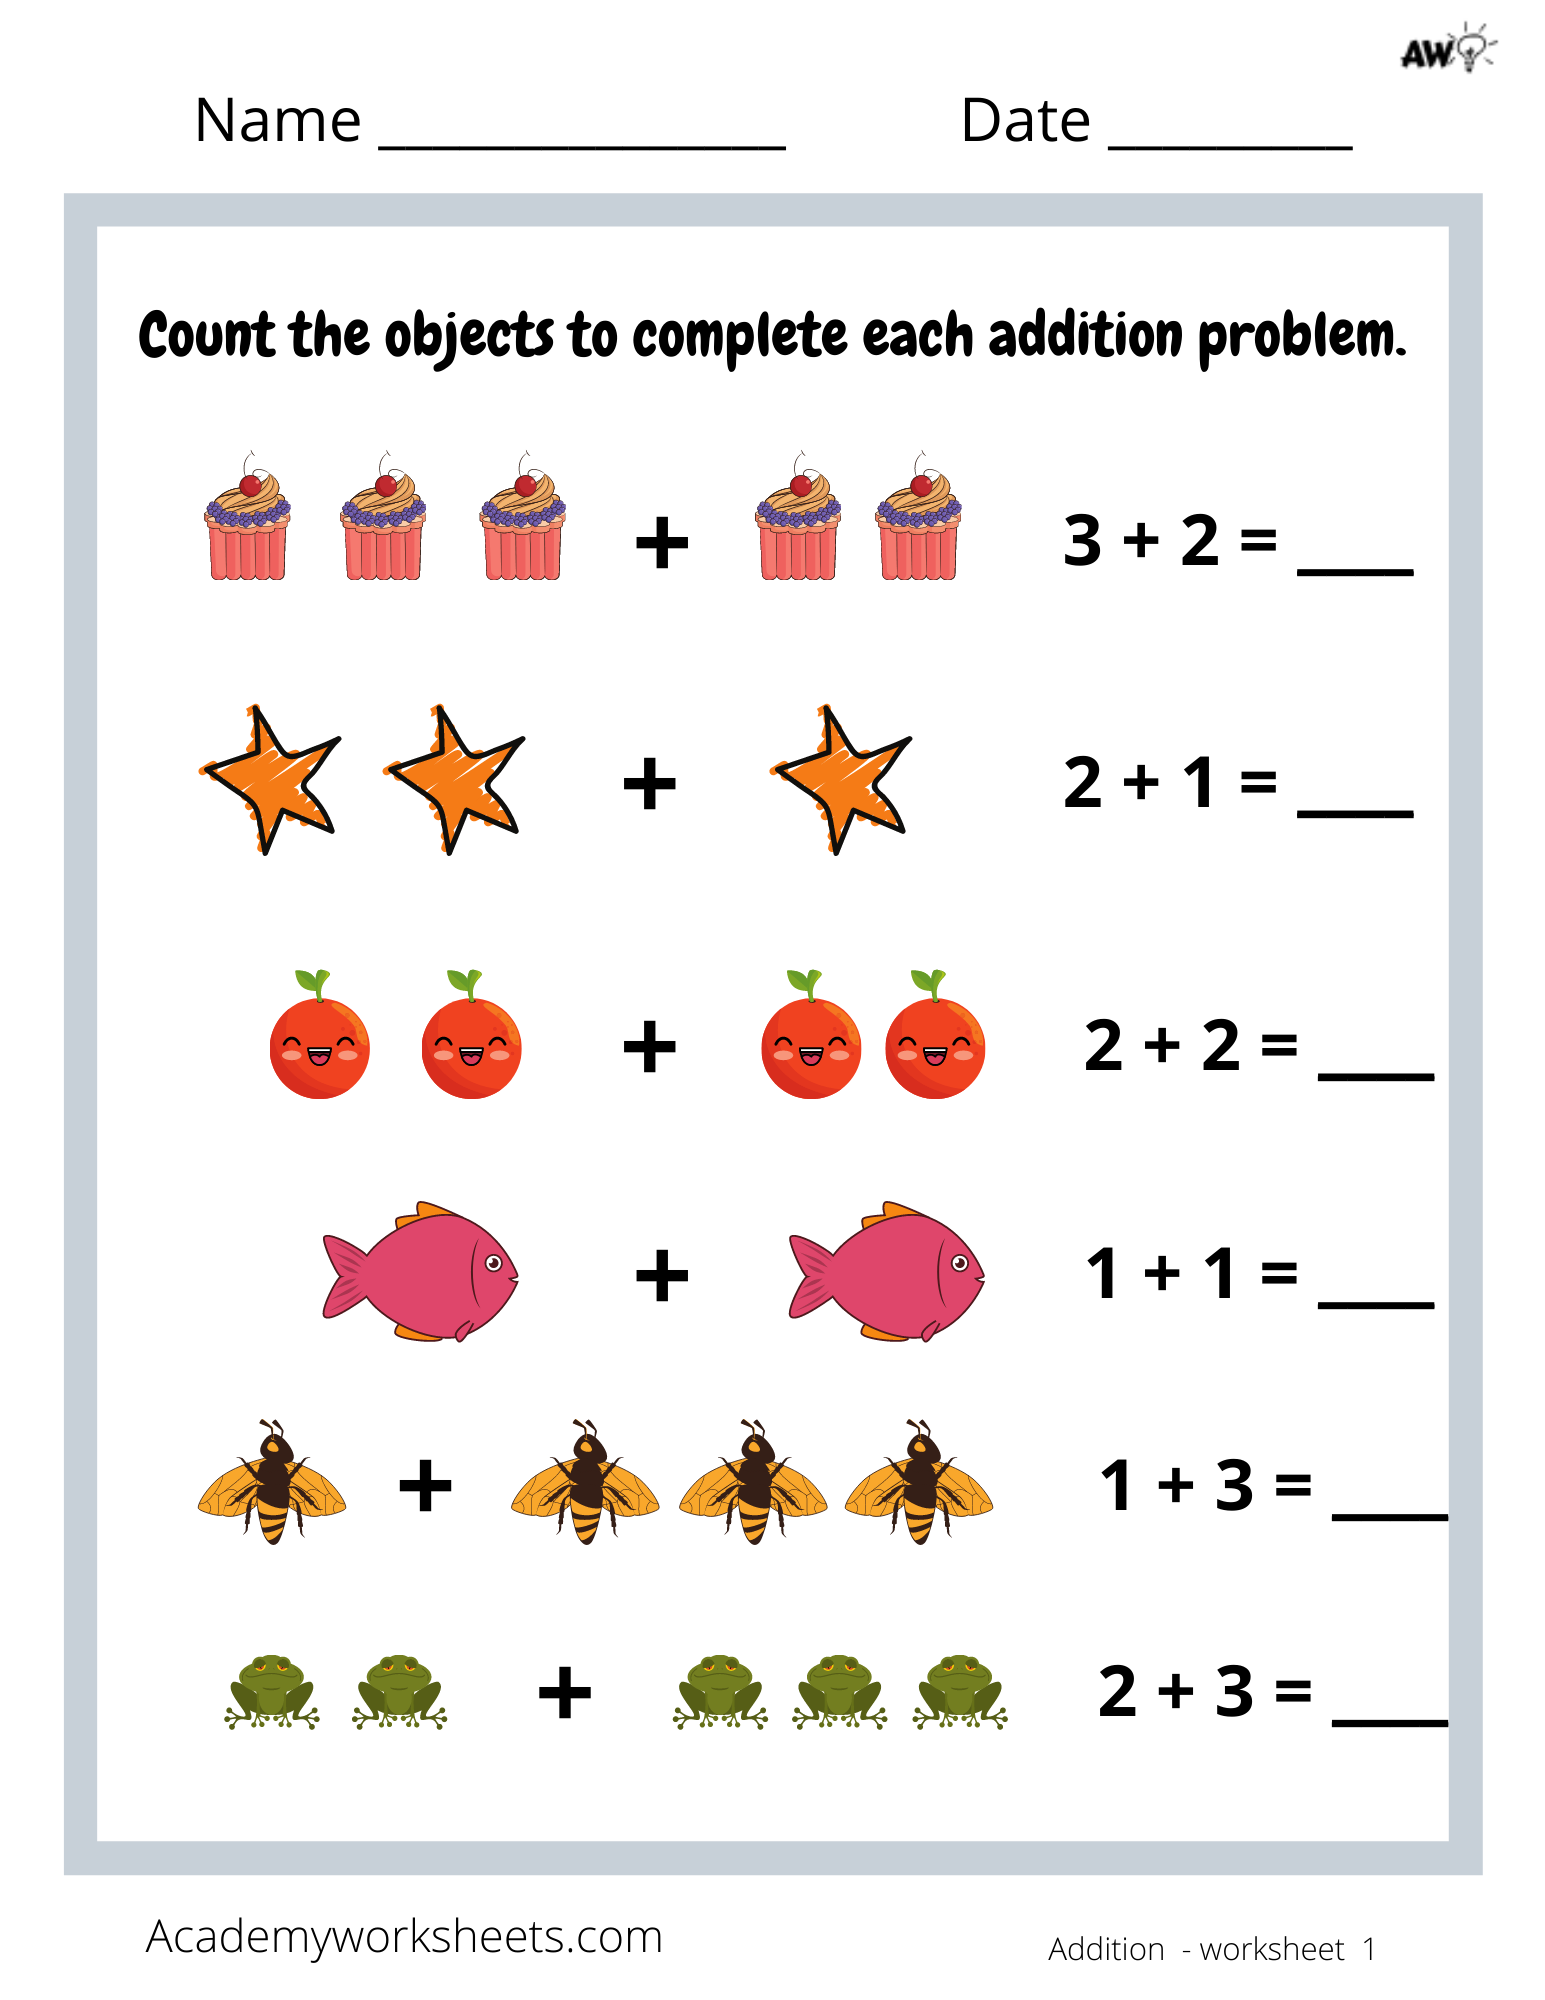 Addition Sums To 5 With Pictures Academy Worksheets